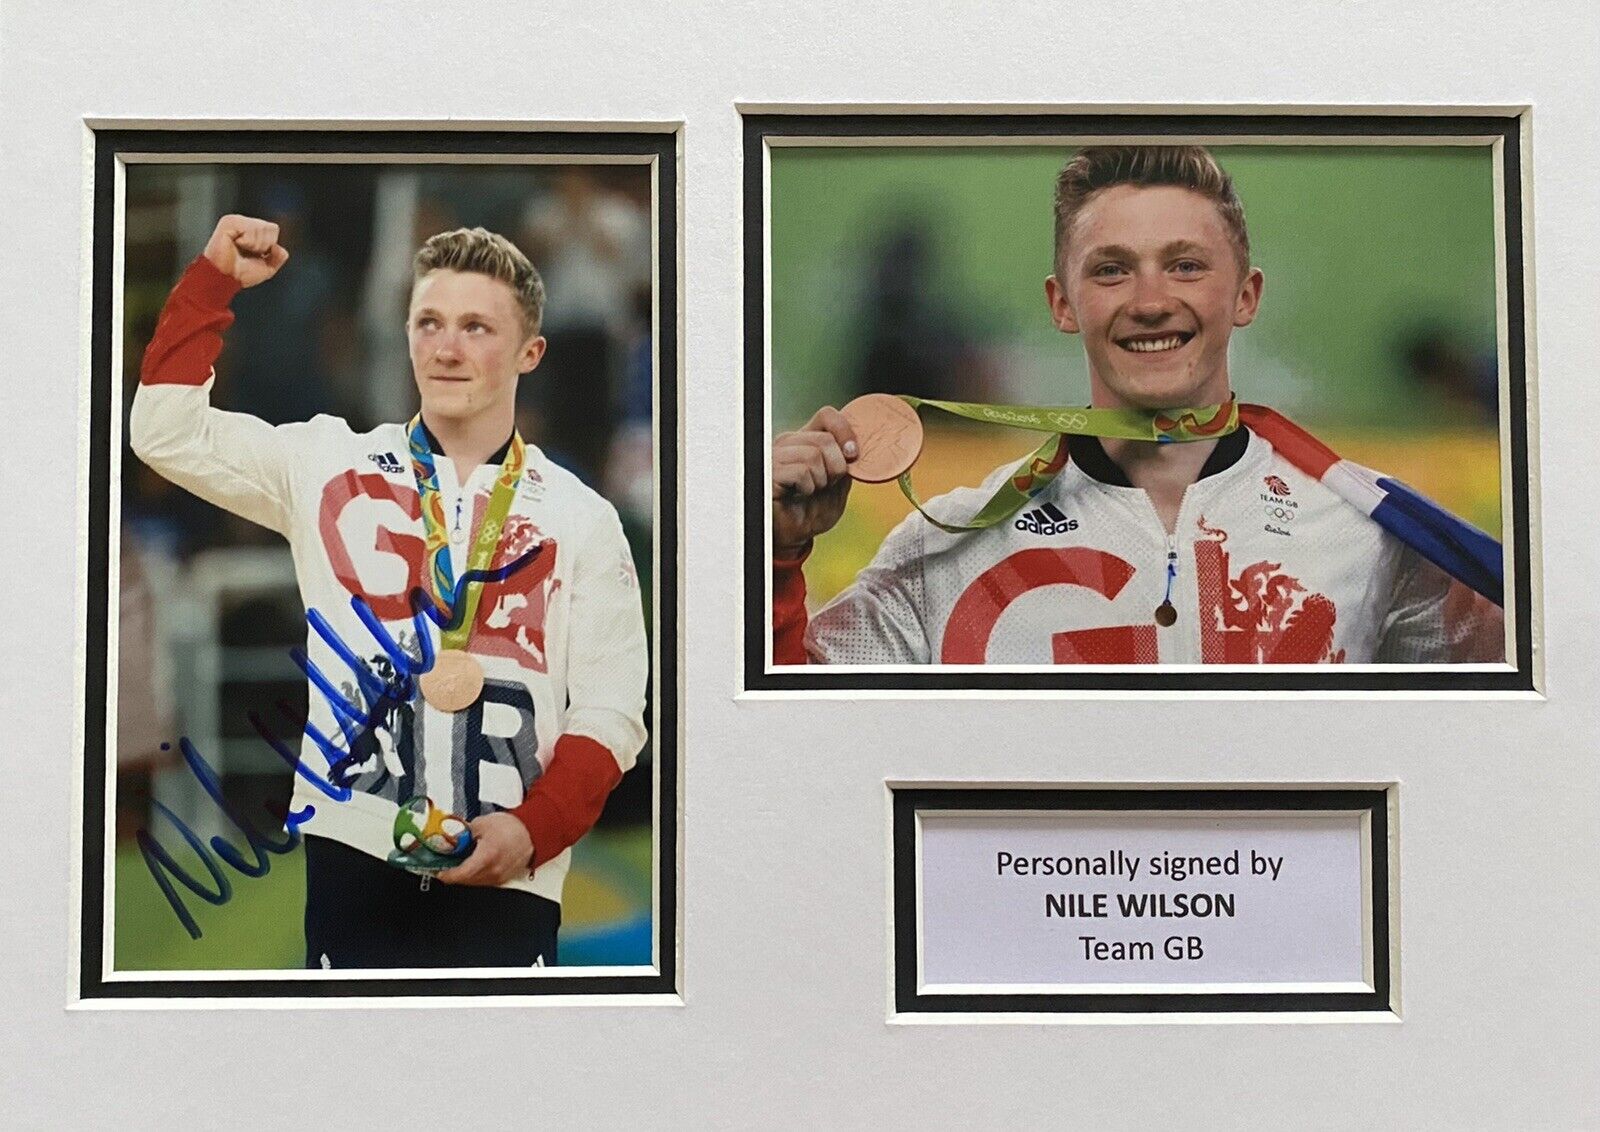 Nile Wilson Hand Signed Olympics Photo Poster painting In A4 Mount Display - Team GB